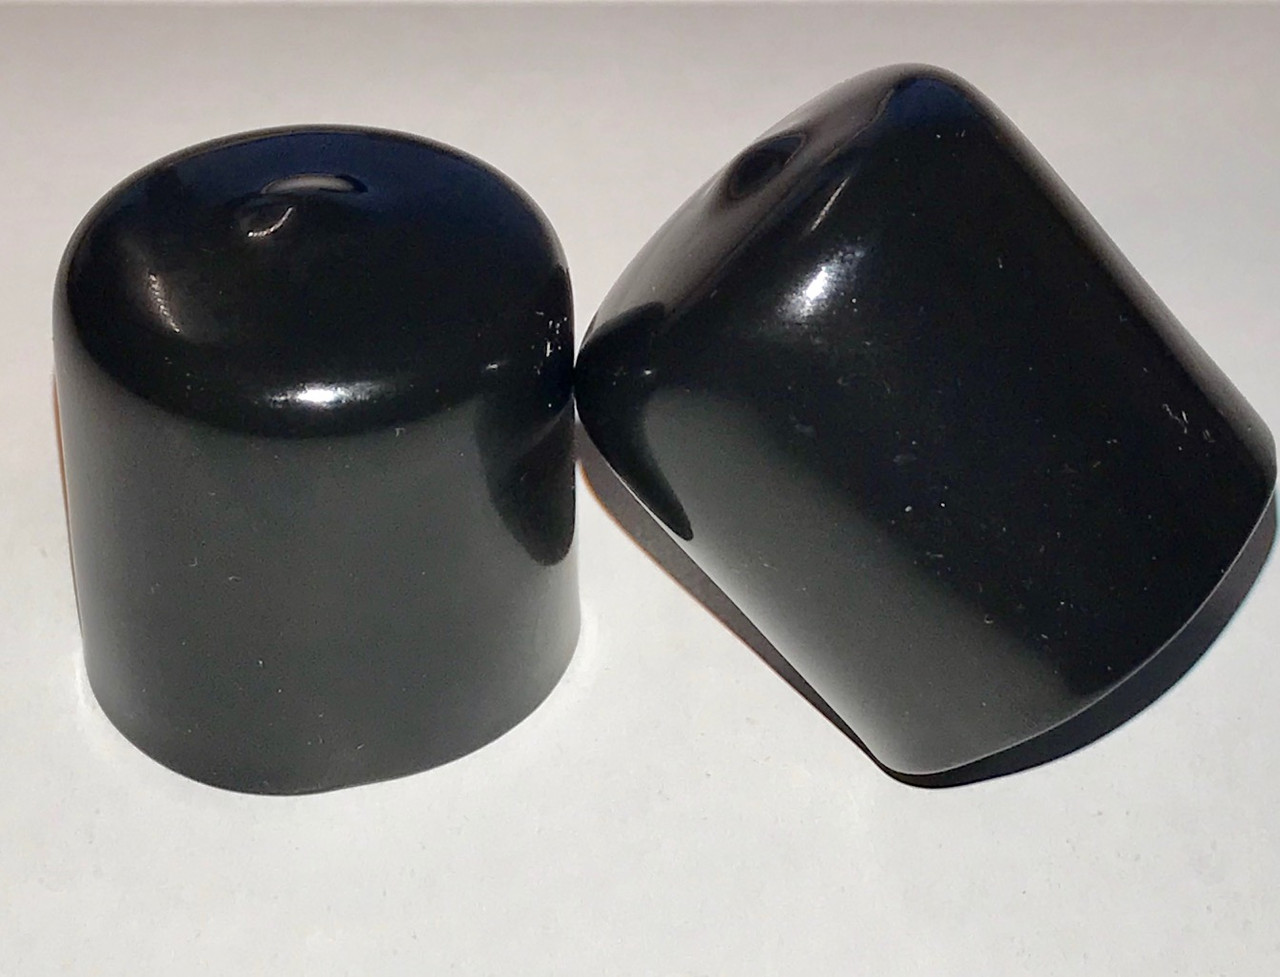 Vinyl Rubber Round End Cap Cover for Pipe Plastic Tube Hub Thread Protector Caps 